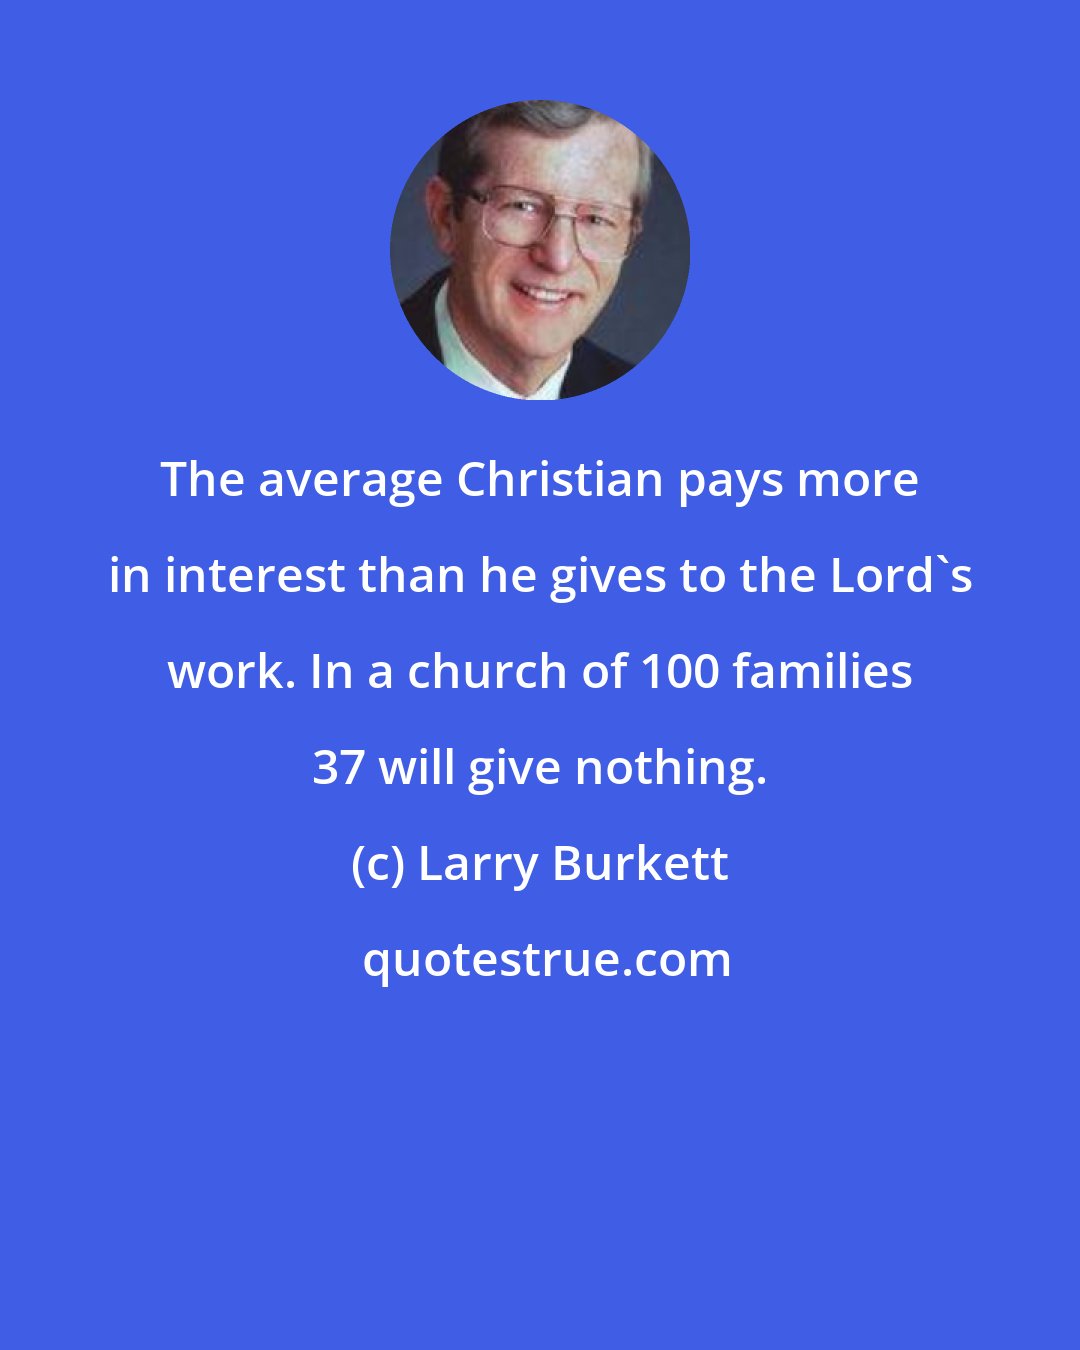 Larry Burkett: The average Christian pays more in interest than he gives to the Lord's work. In a church of 100 families 37 will give nothing.